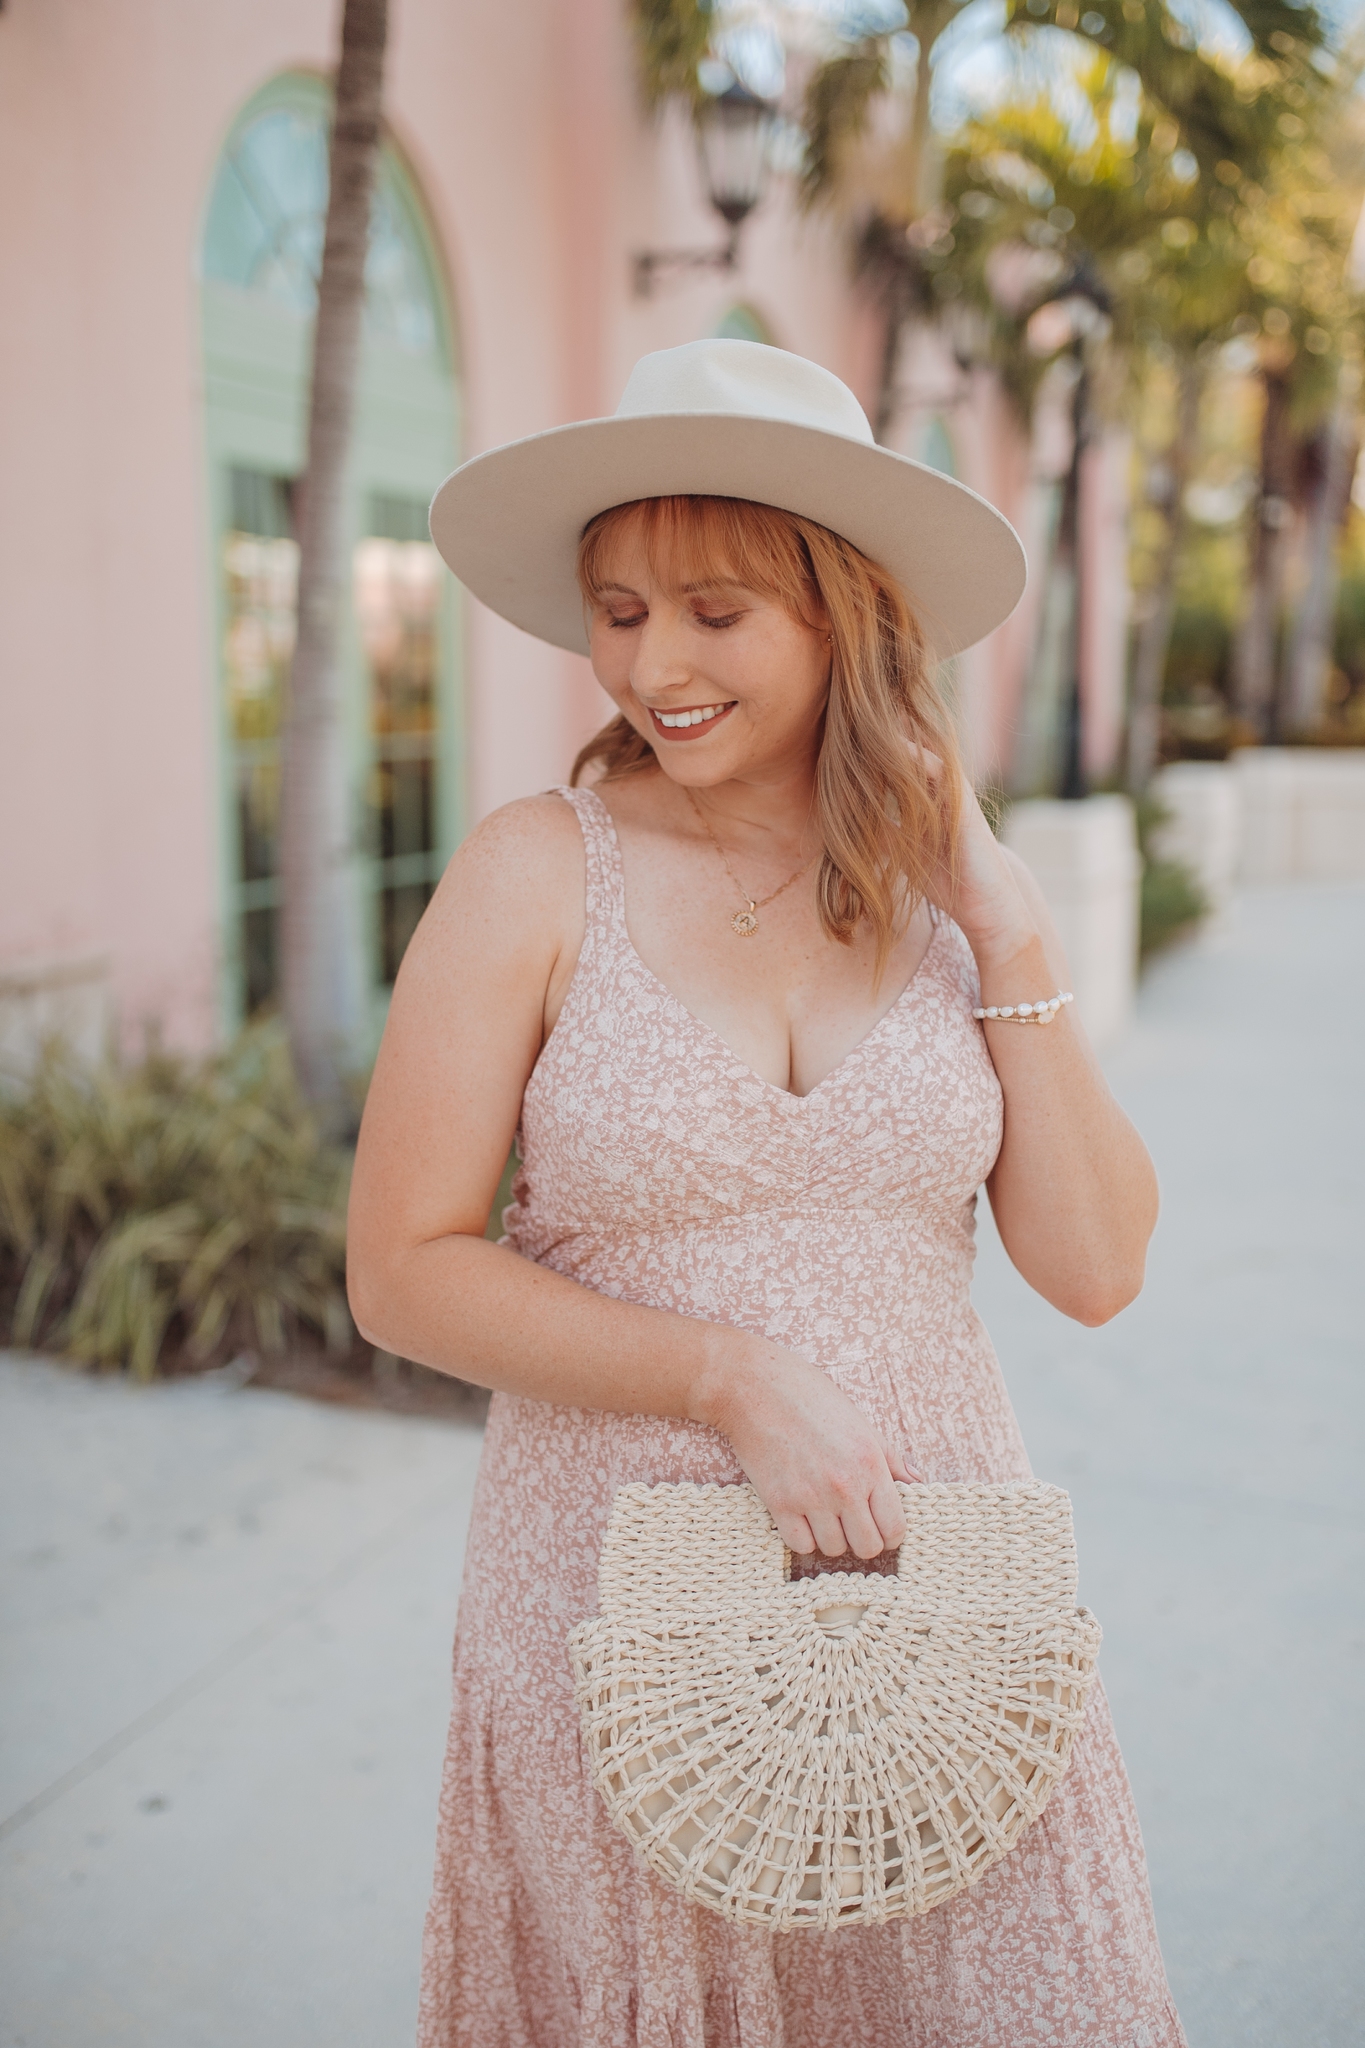 Cute Beach Outfits for Your Summer Outfit Inspiration - What To Wear on a Beach Vacation - Affordable by Amanda shares Beach Outfit Ideas